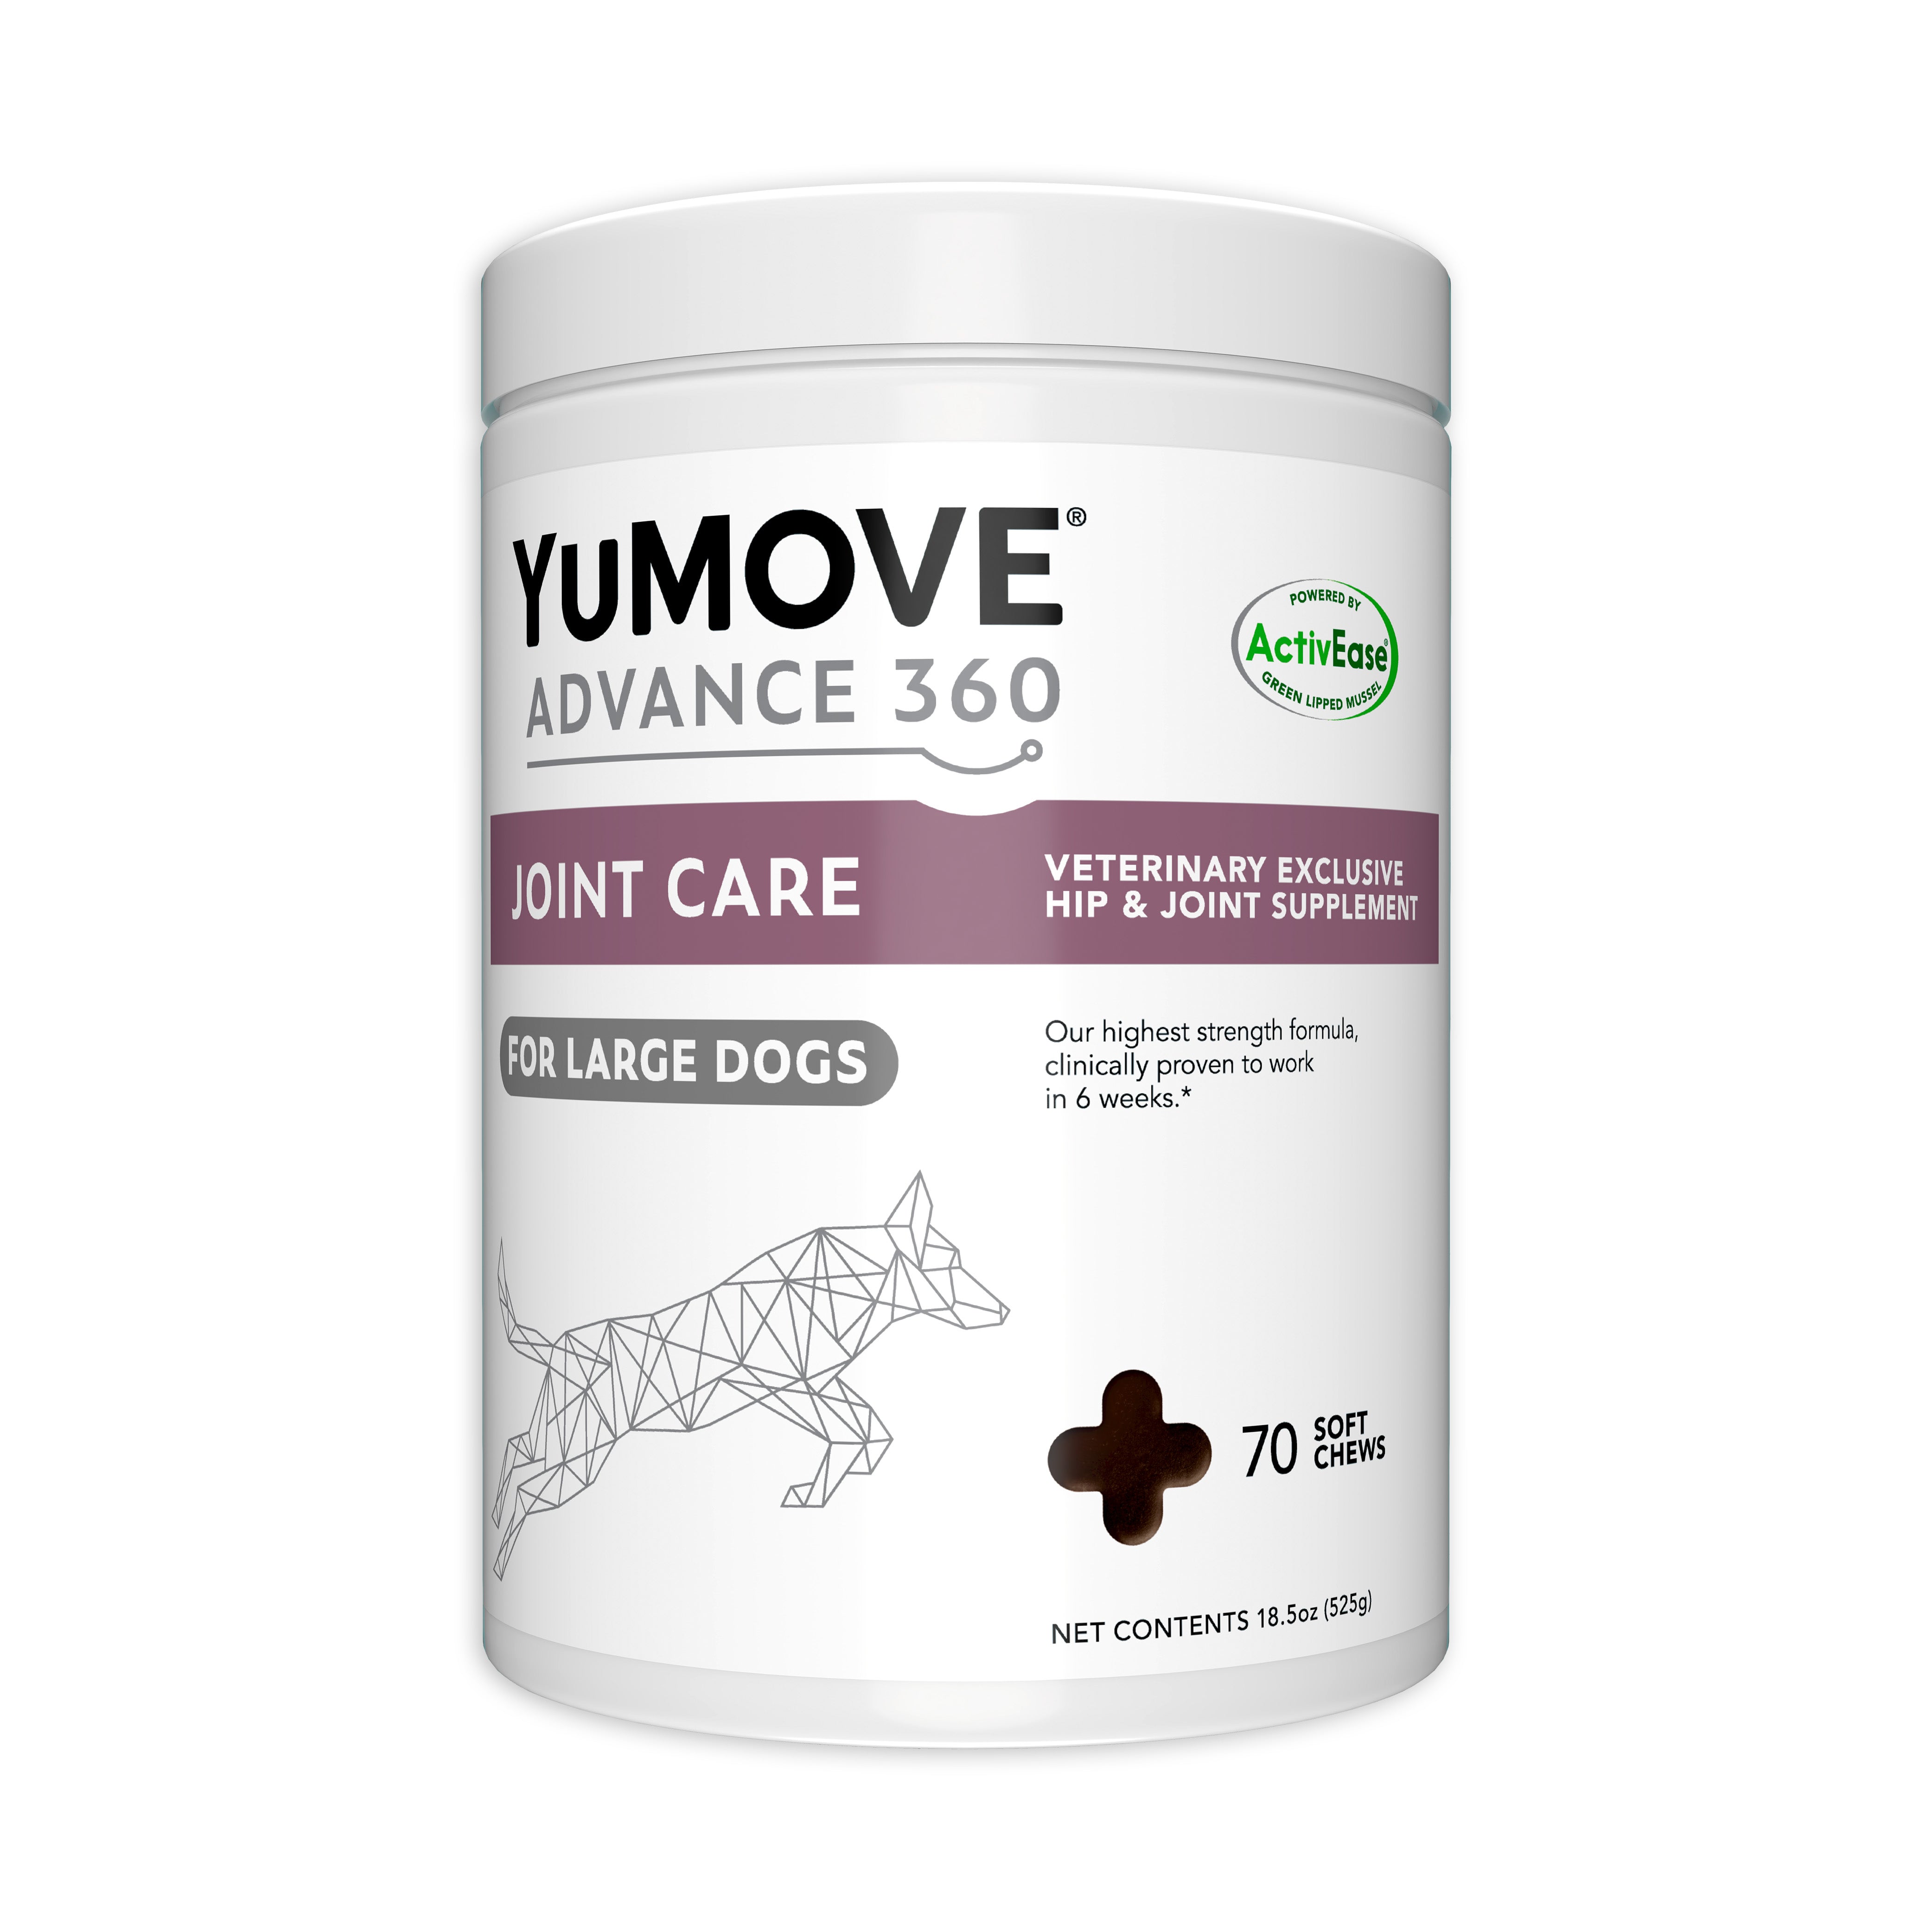 A white container of YuMOVE ADVANCE 360 Joint Care for Large Dogs, featuring a geometric wireframe dog illustration, labeled as a veterinary exclusive hip & joint supplement, with 70 soft chews, net contents 18.5 oz (525g).